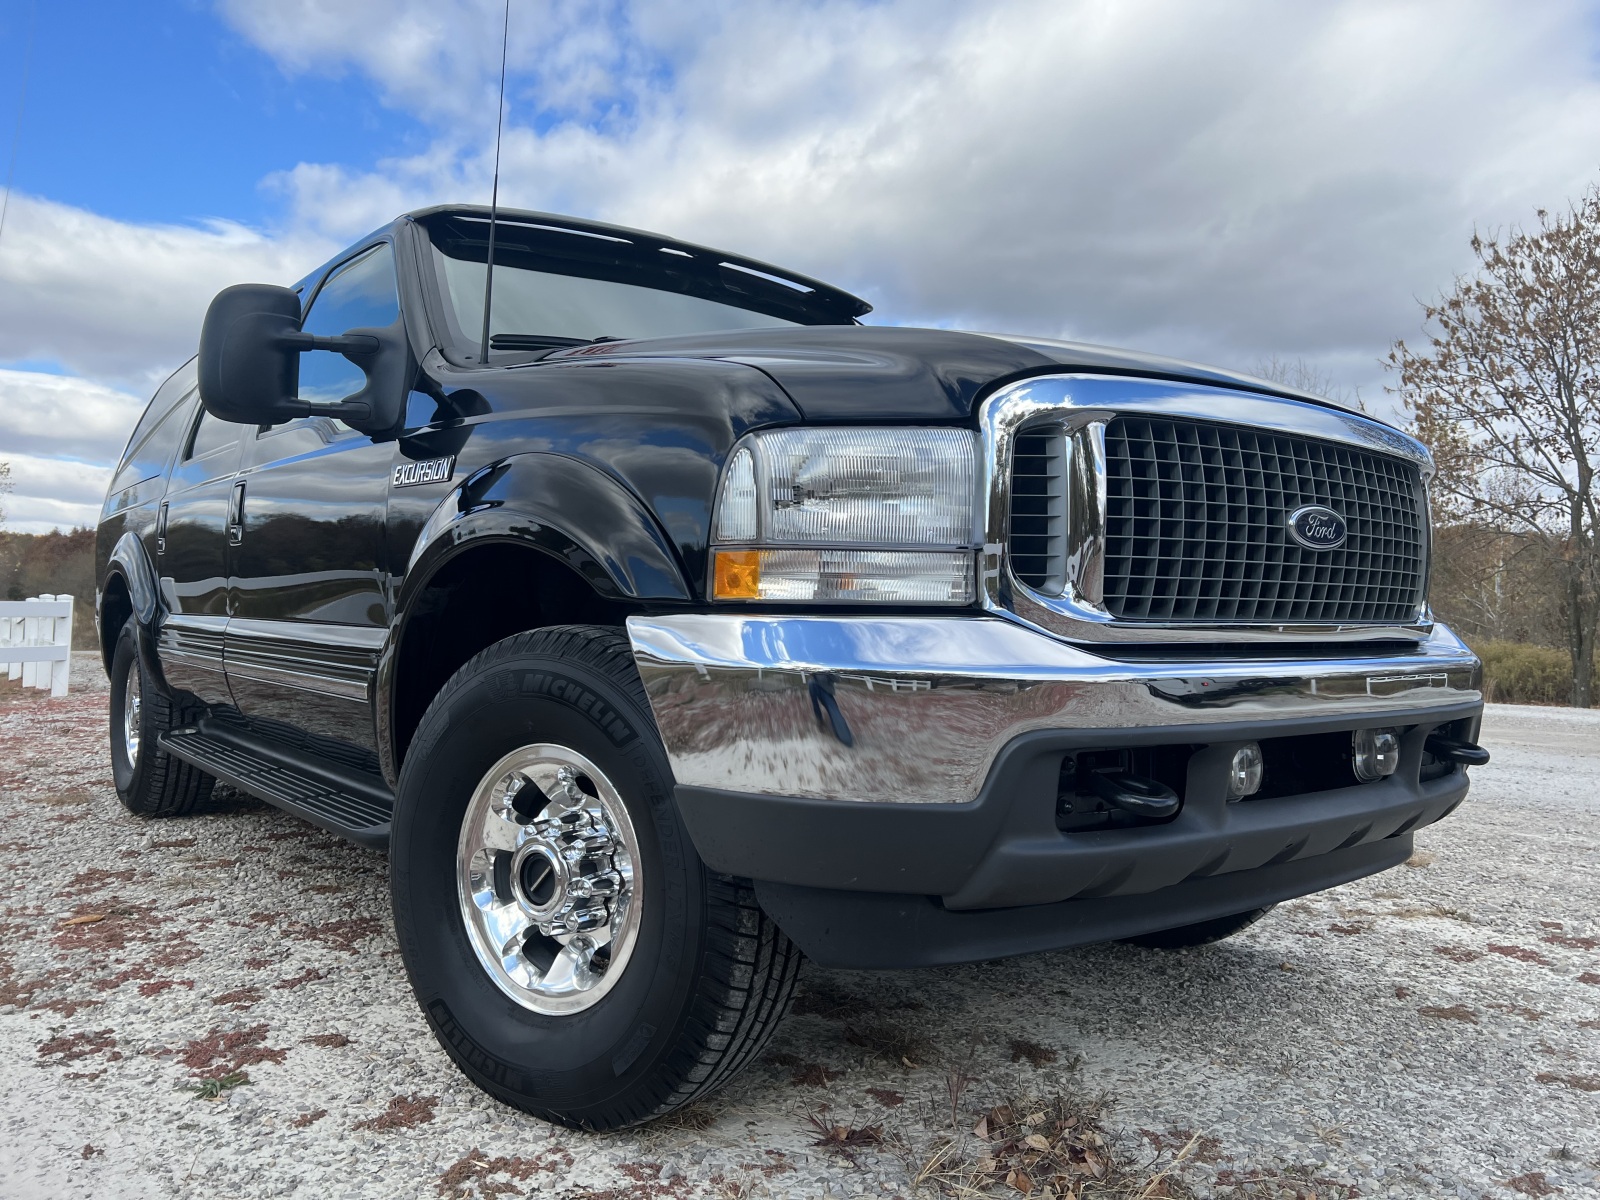 For Sale: 2001 Ford Excursion 4x4 7.3L 128,800miles - photo10